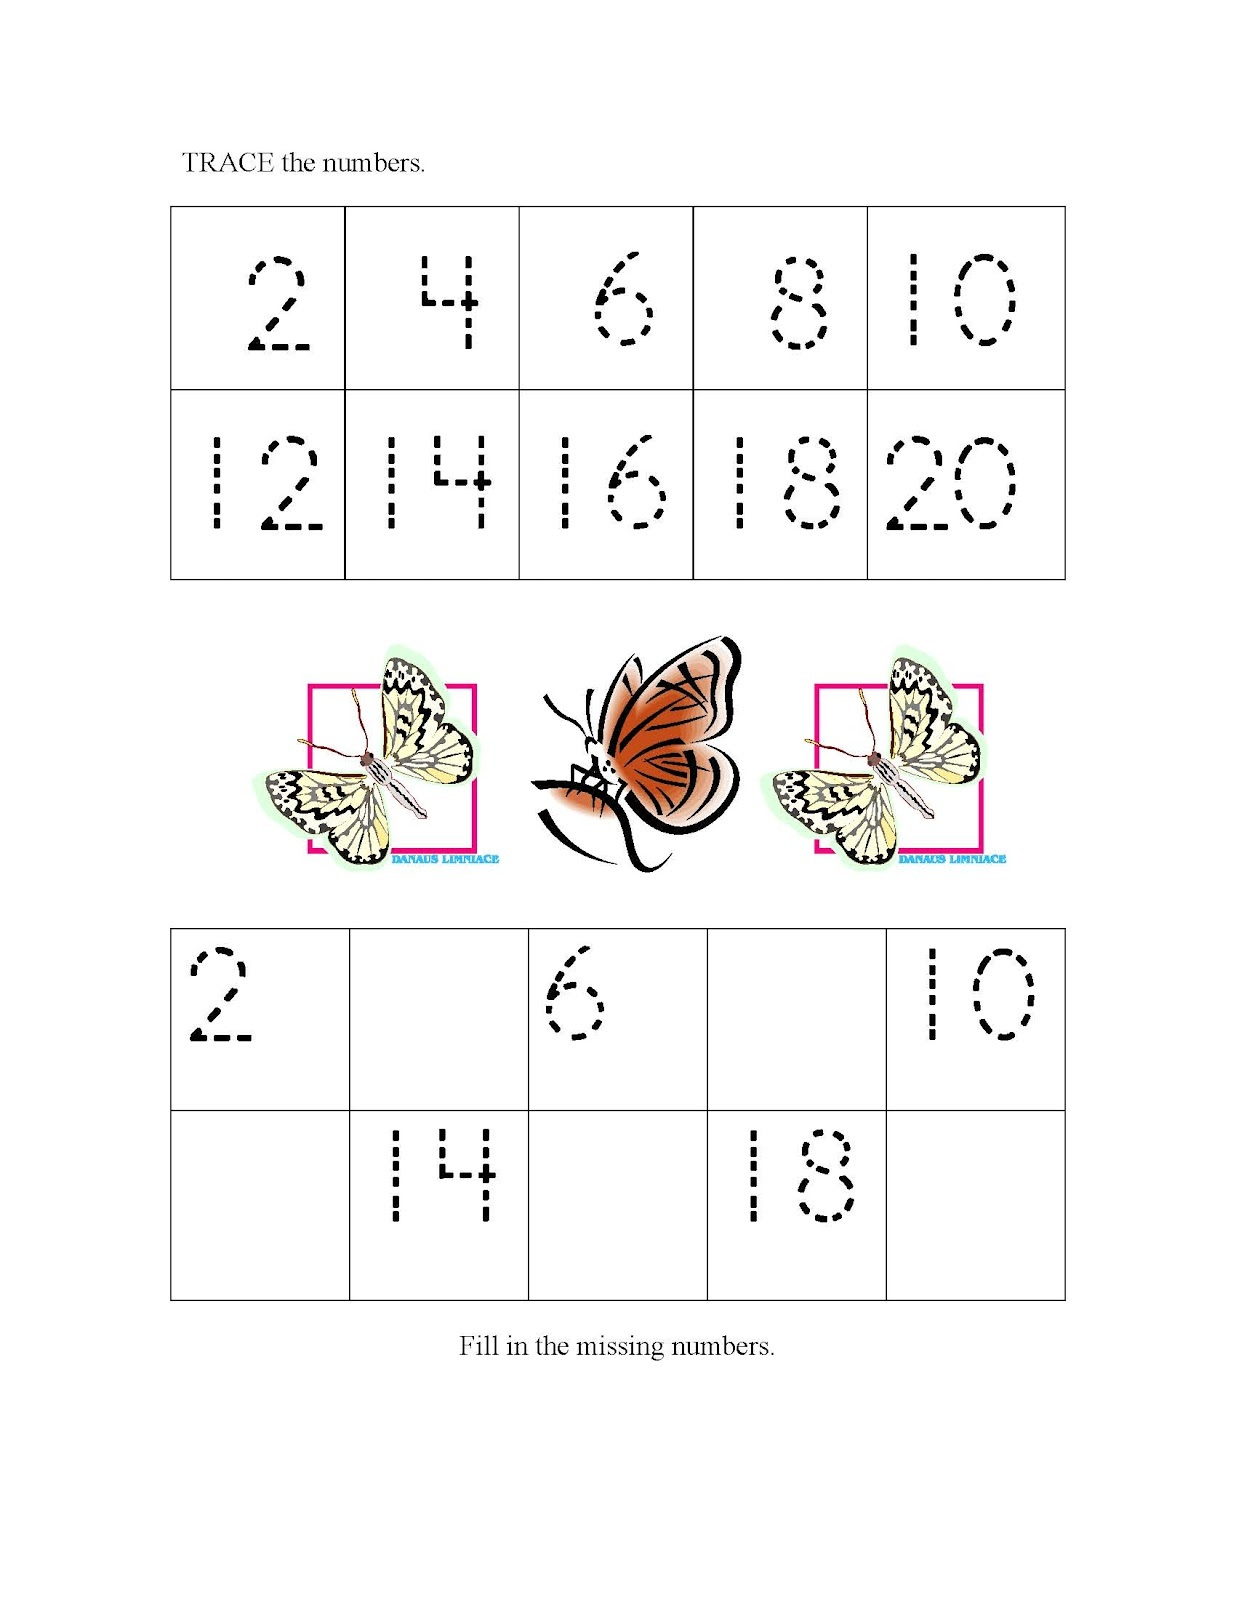 Skip Count By 2 Worksheets Activity Shelter